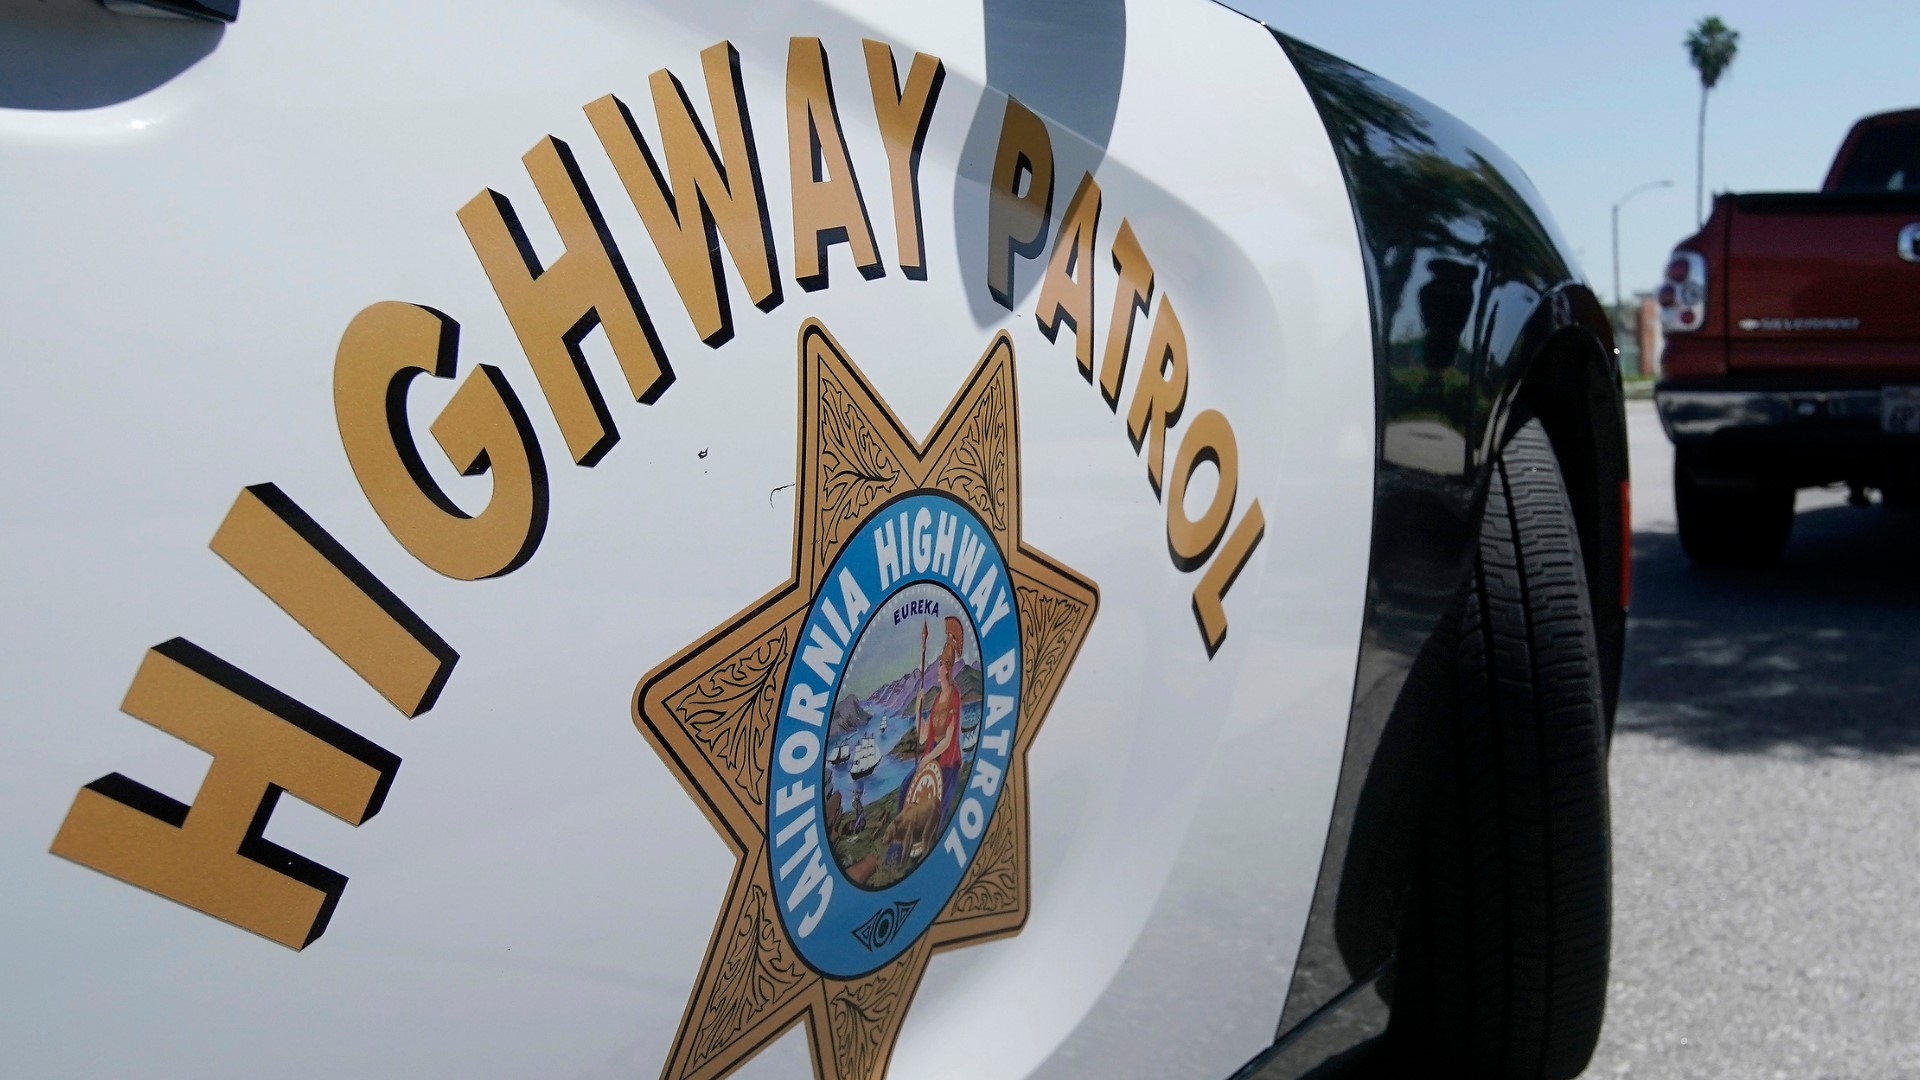 California Highway Patrol officials said the 51-year-old man was working underneath the Ford Explorer moments before his death.